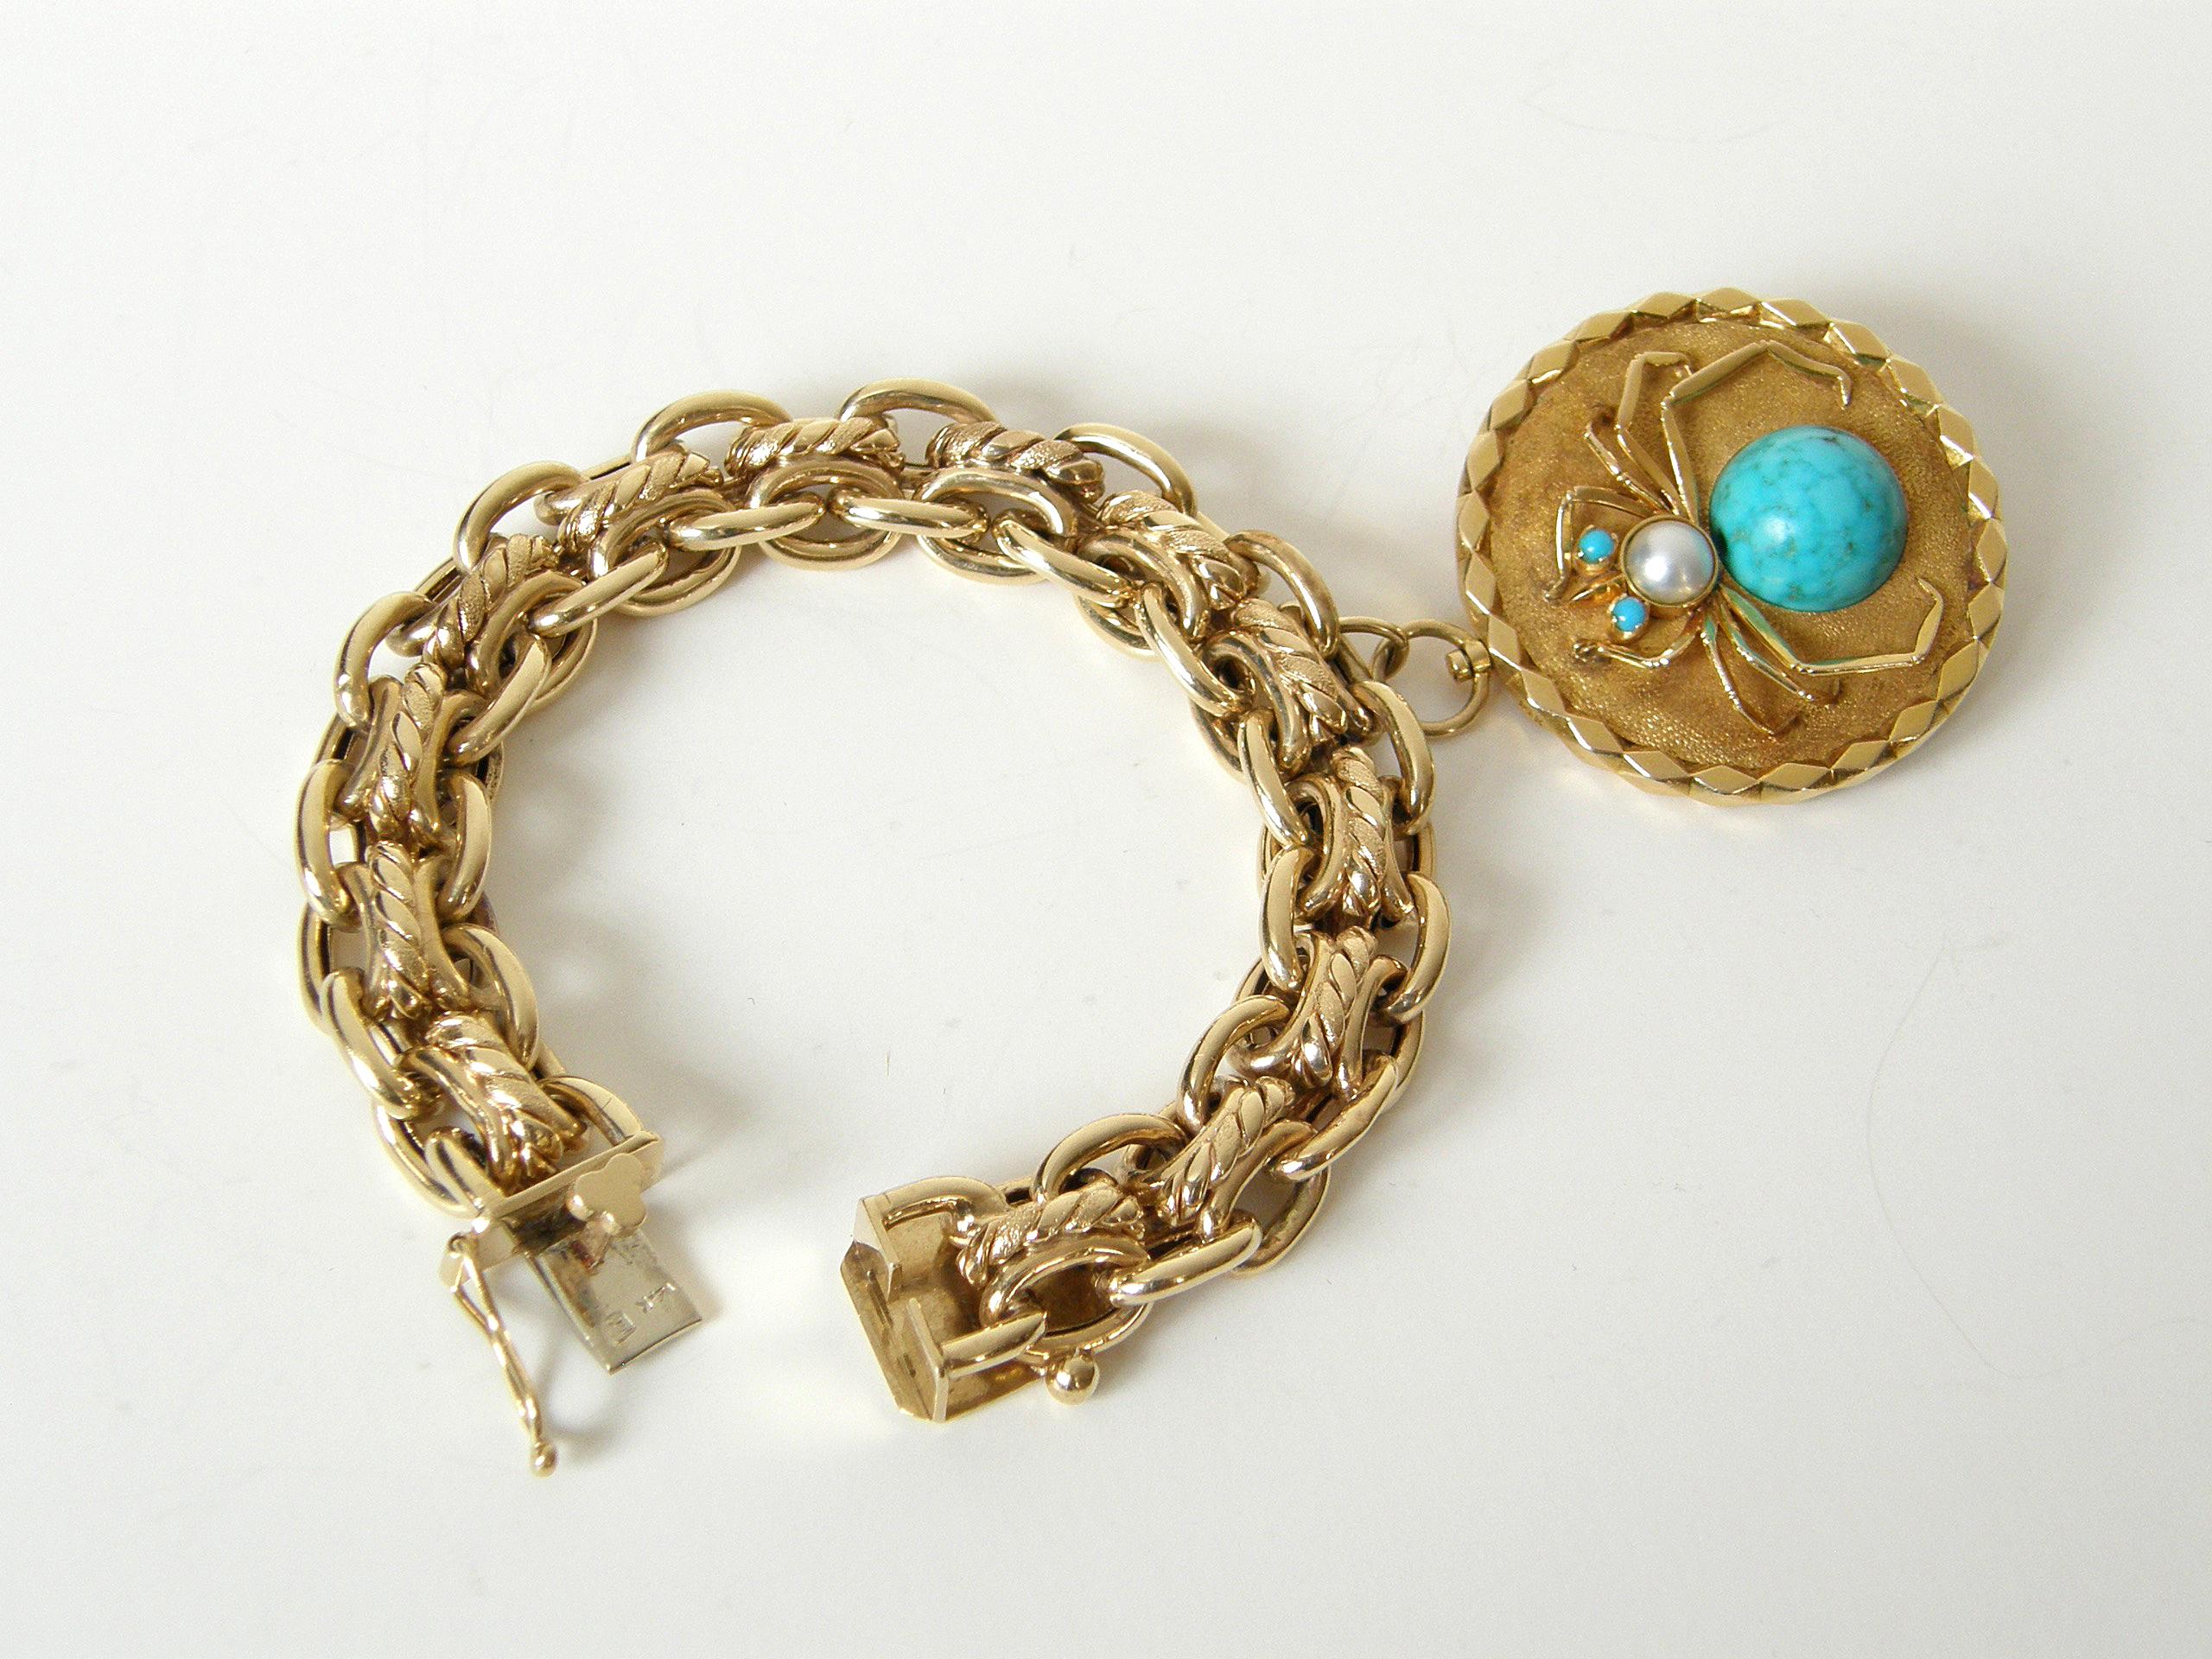 Women's or Men's 14K Gold Double Chain Link Bracelet with Giant Two Sided Spider and Fly Charm